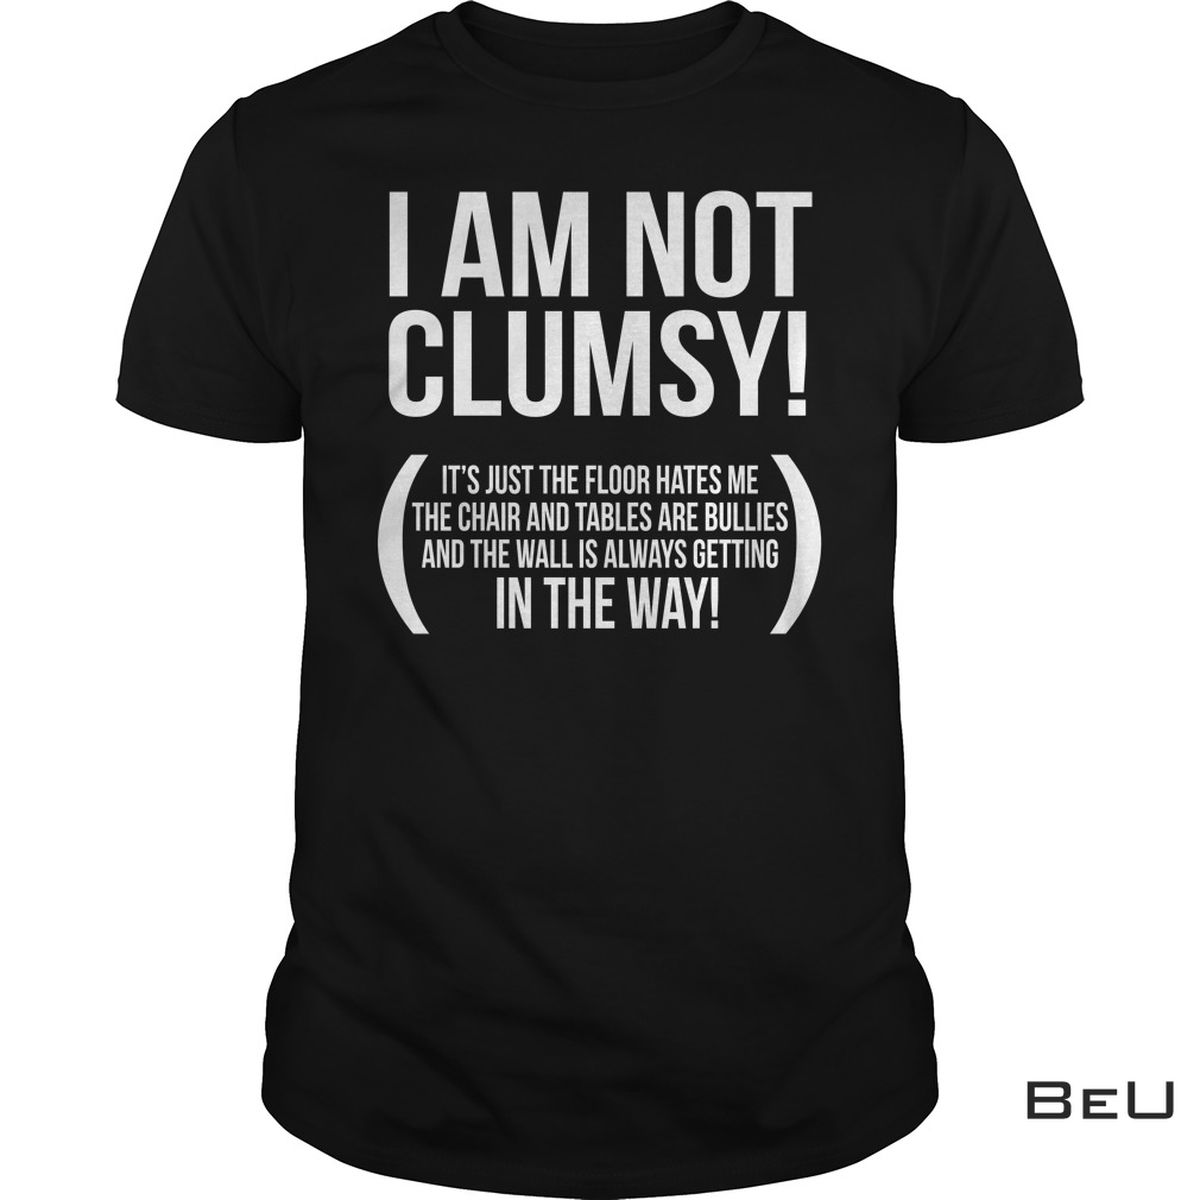 I'm Not Clumsy It's Just The Floor Hates Me Shirt